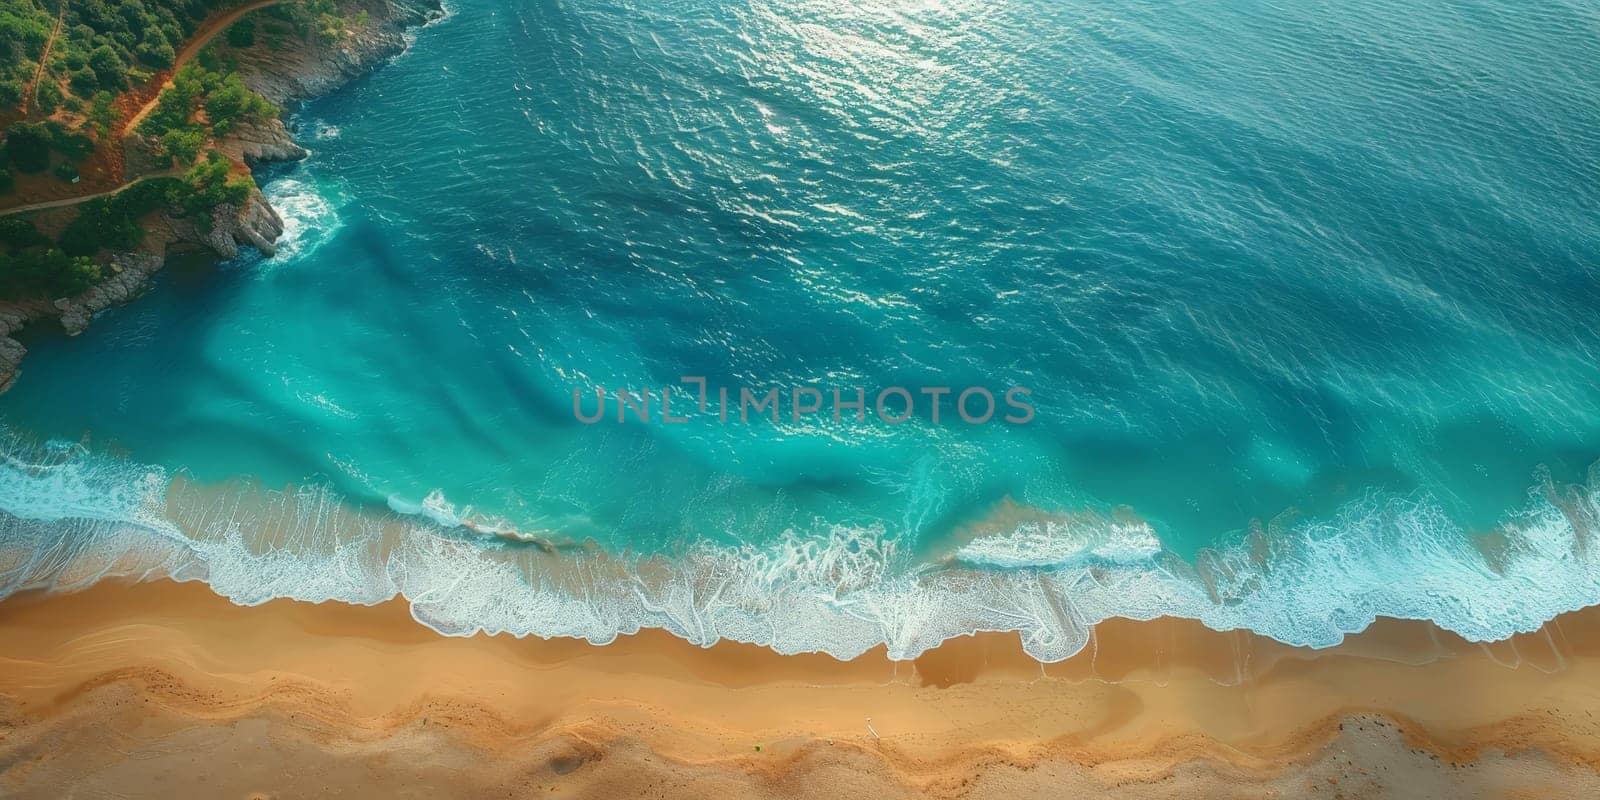 The ocean is calm and blue, with a sandy beach in the background. The water is still, and the sky is clear, creating a peaceful and serene atmosphere